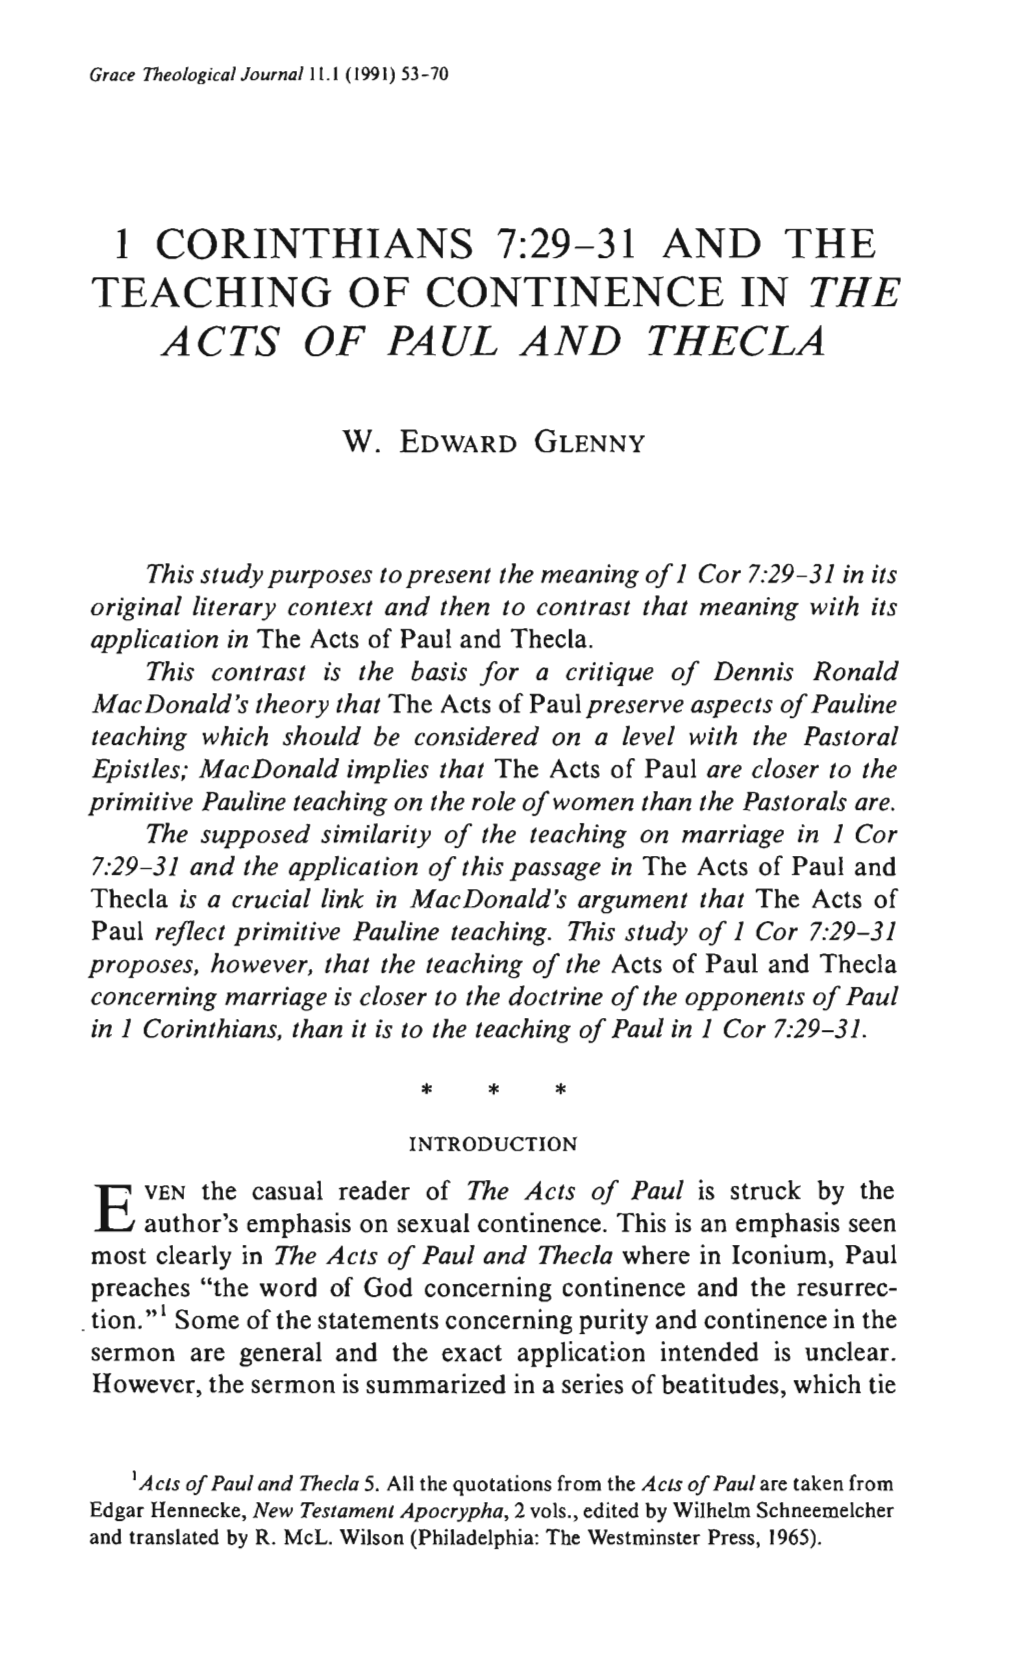 1 Corinthians 7:29-31 and the Teaching of Continence in the Acts of Paul and Thecla